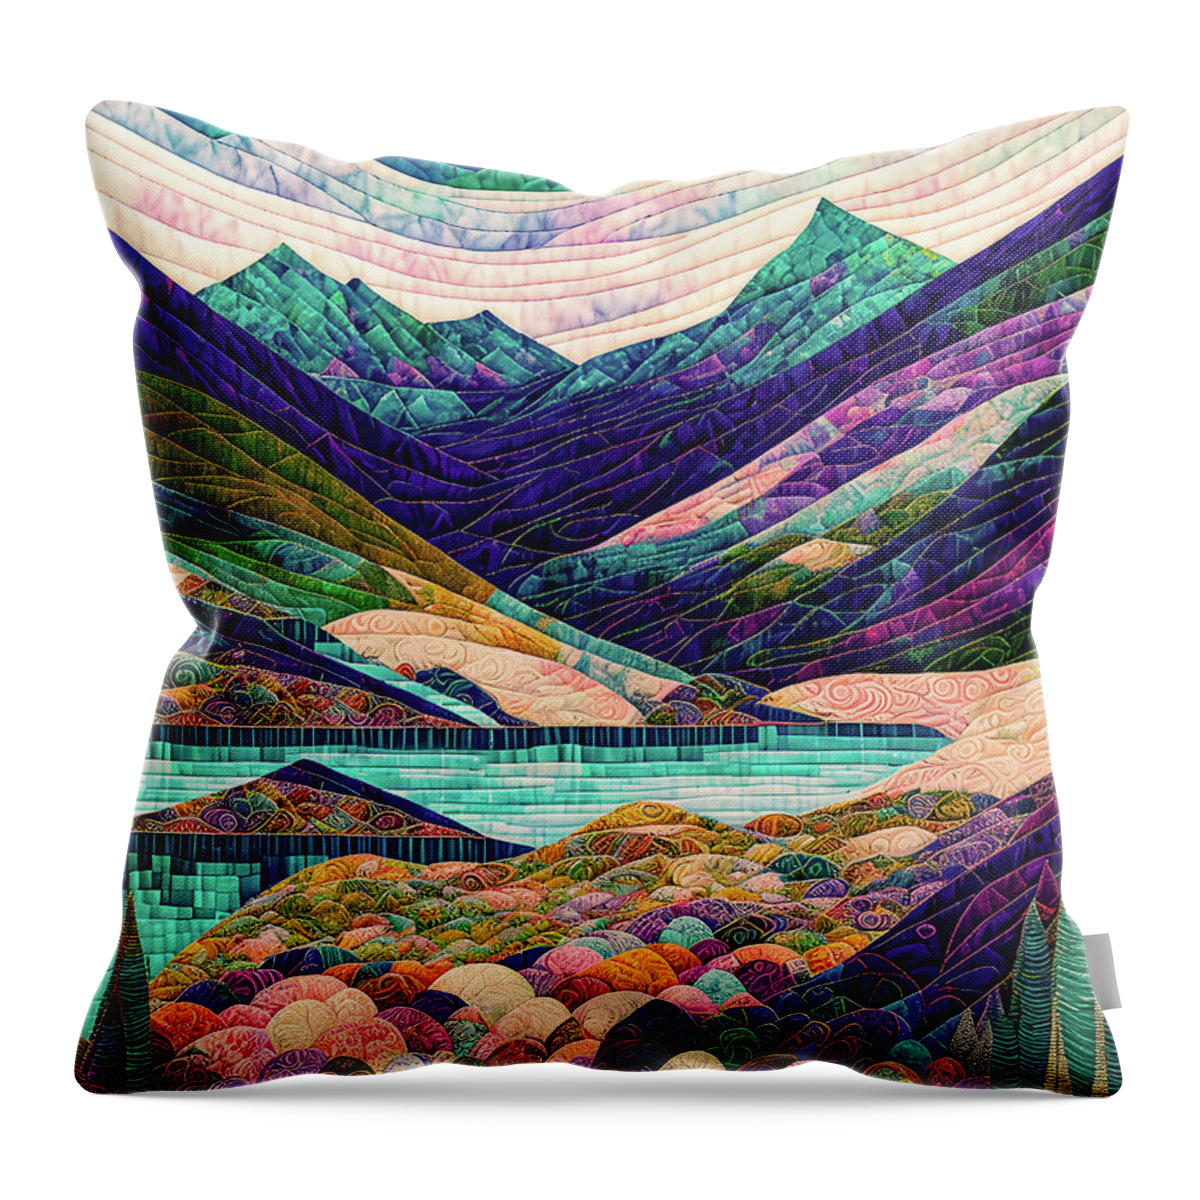 Landscapes Throw Pillow featuring the digital art Land of Dreams - Quilted by Peggy Collins